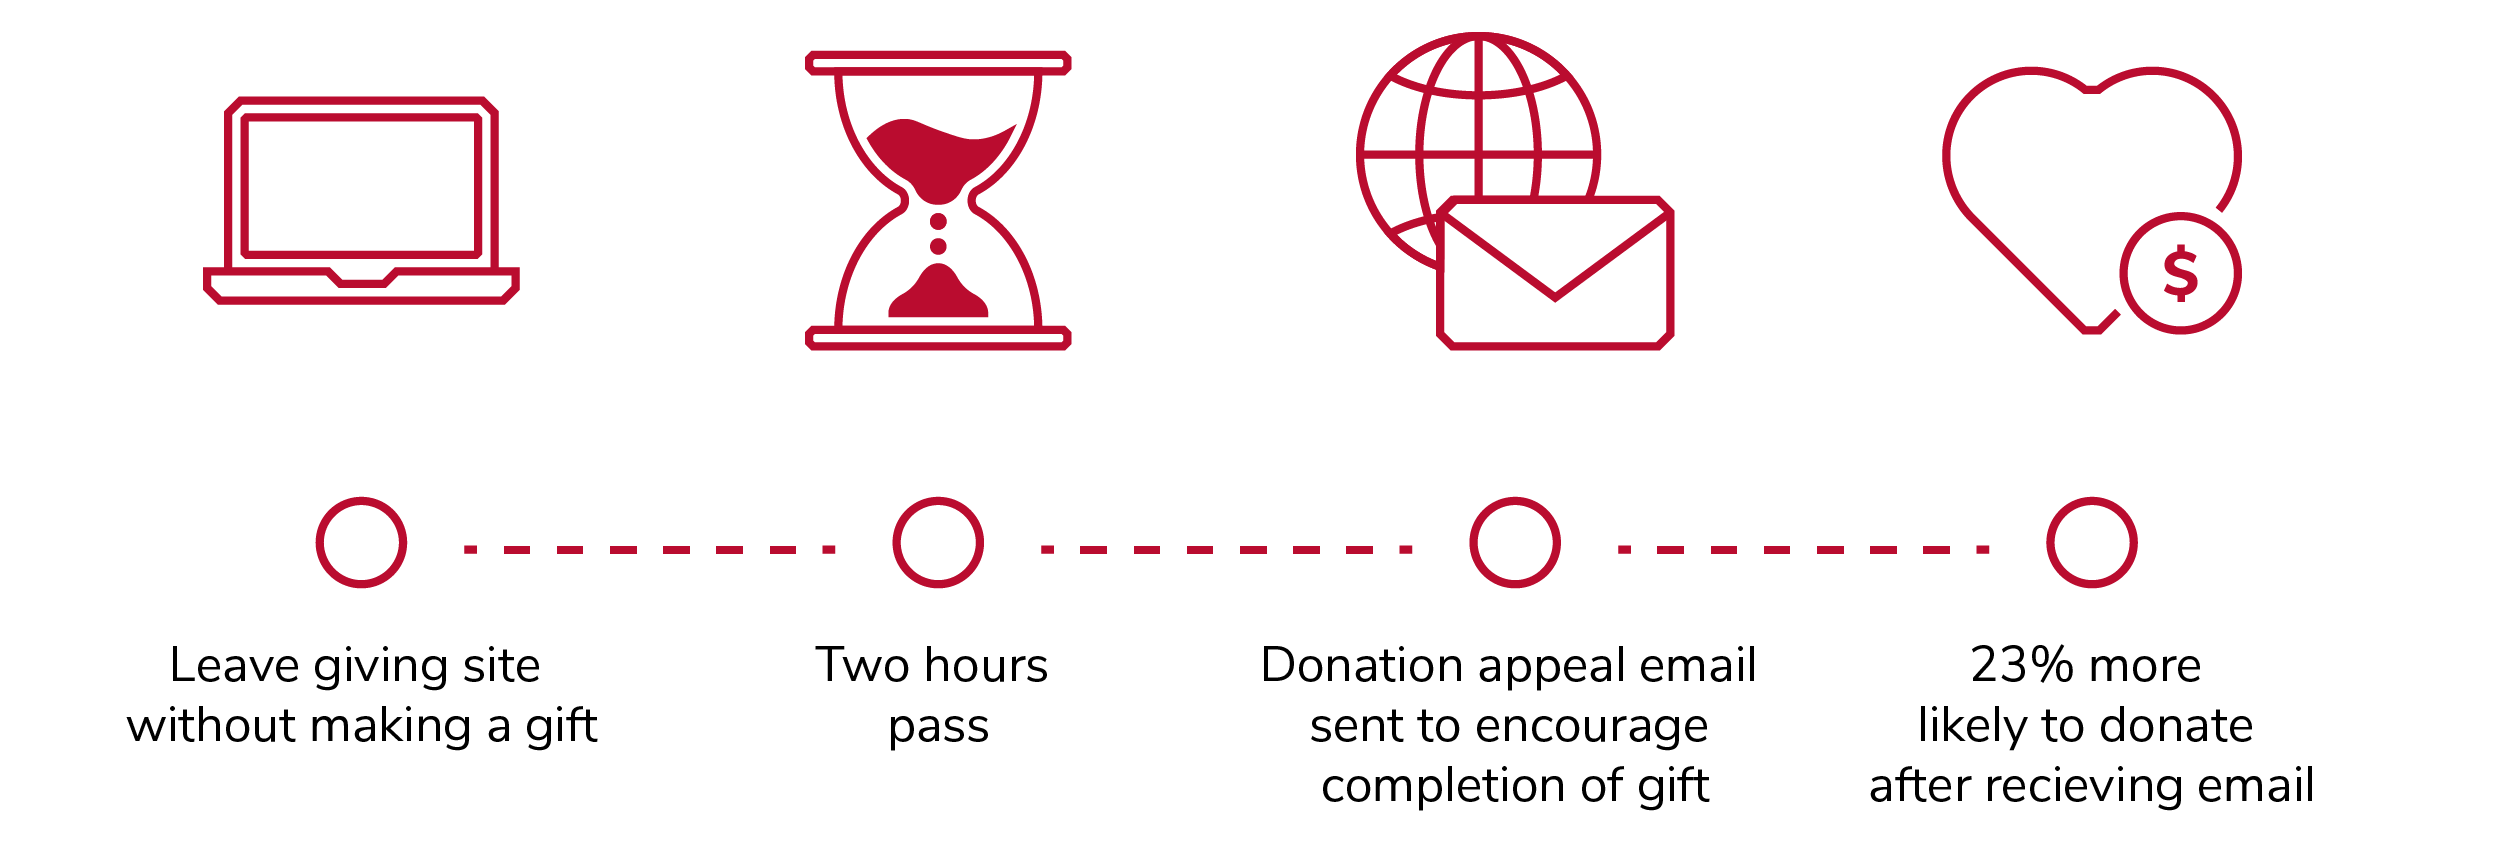 Infographic showing a flowchart, from left to right: Leaving giving site without making a gift, then two hours pass, then a donation appeal email is sent to encourage completion of gift, and finally there is a 23% more likely to donate after receiving email